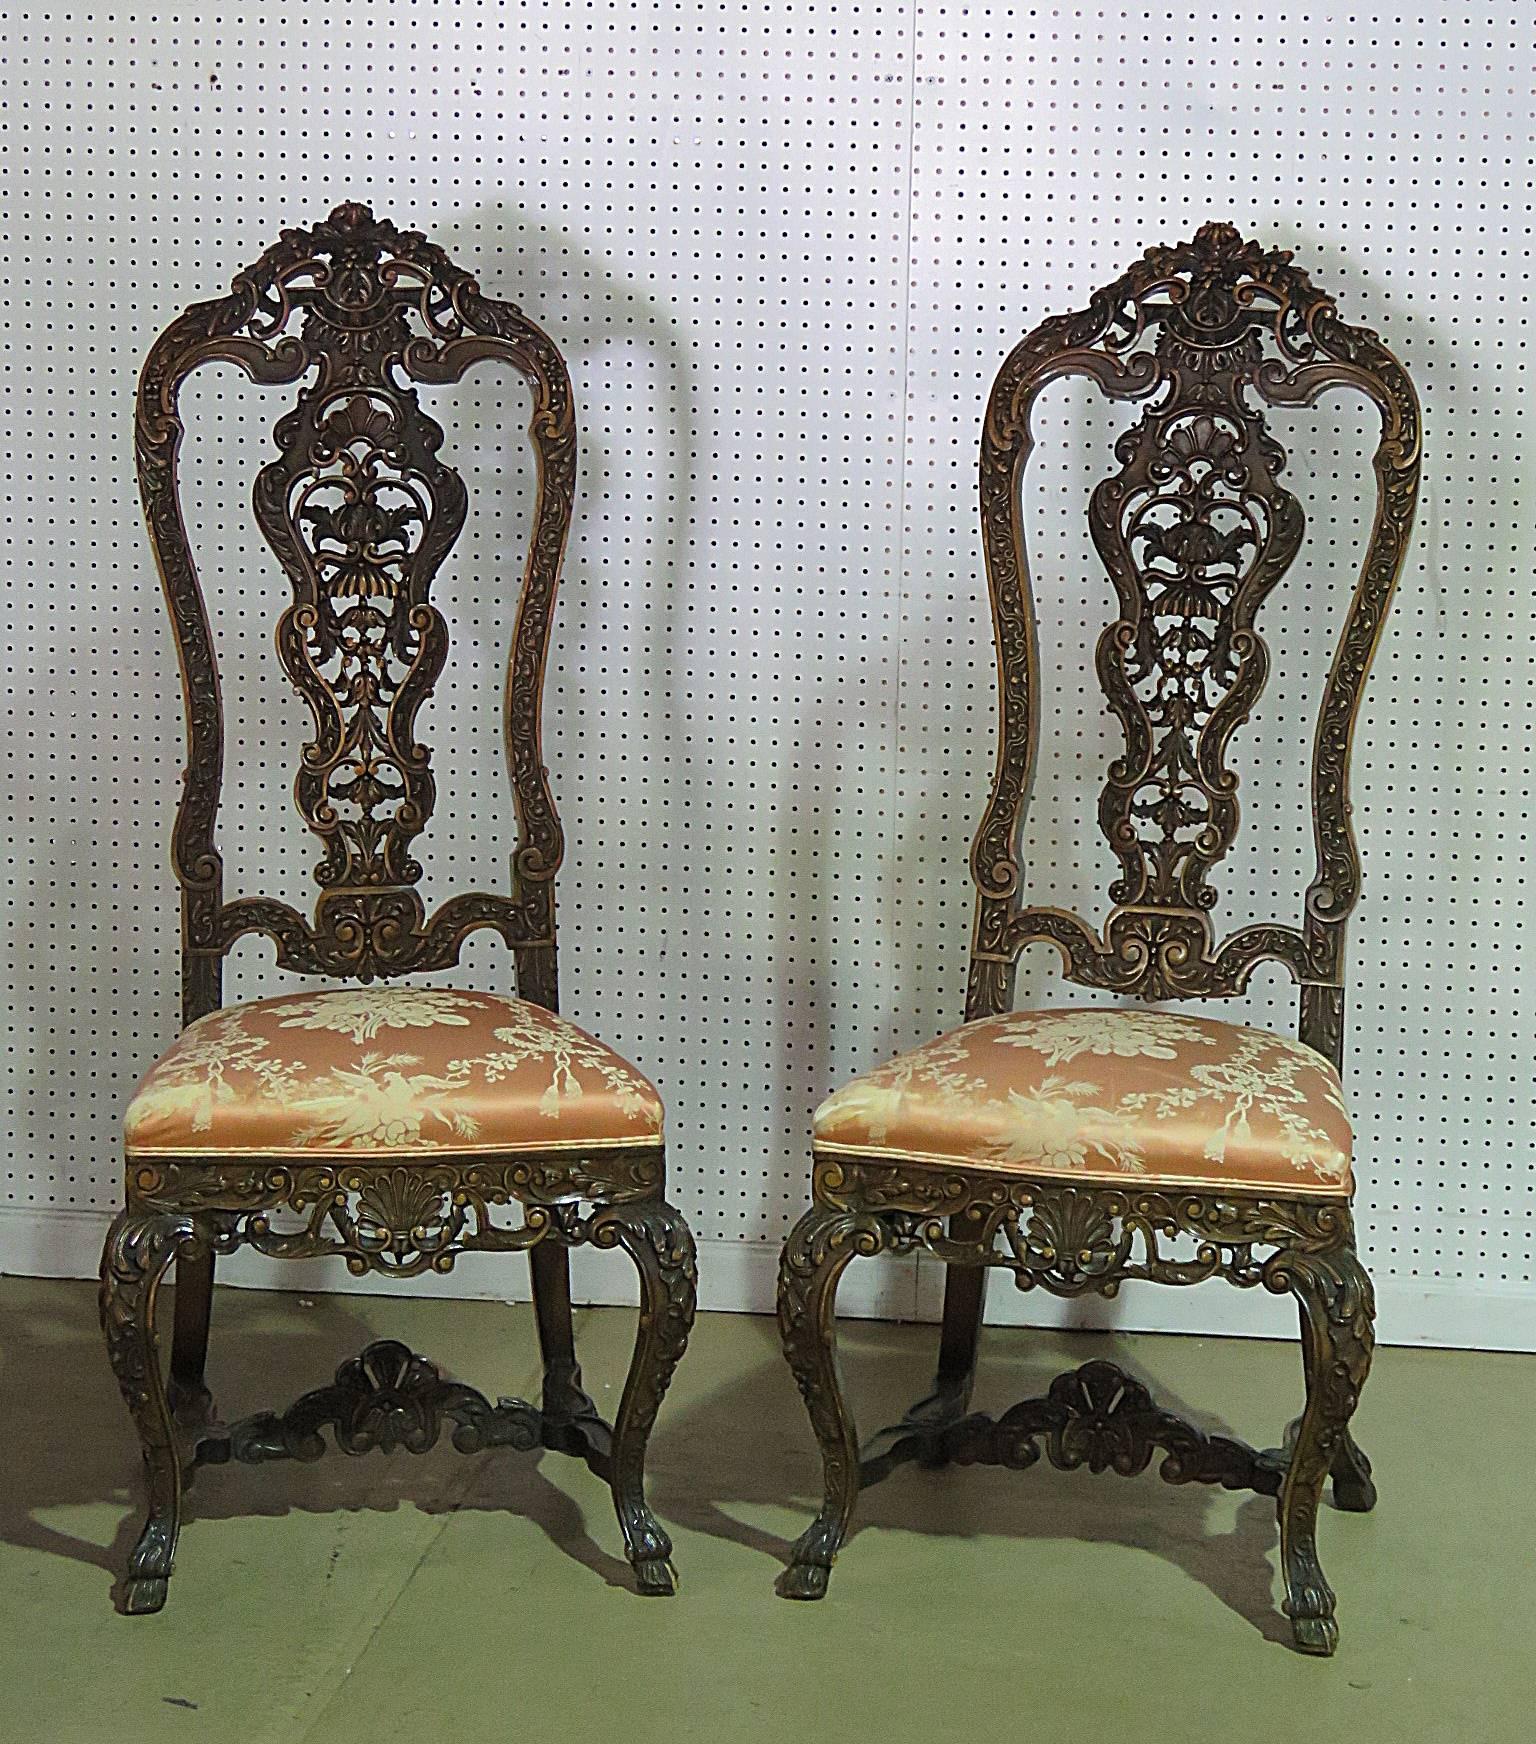 Pair of Baroque carved walnut side chairs with upholstered seats. The seat height is 21.25